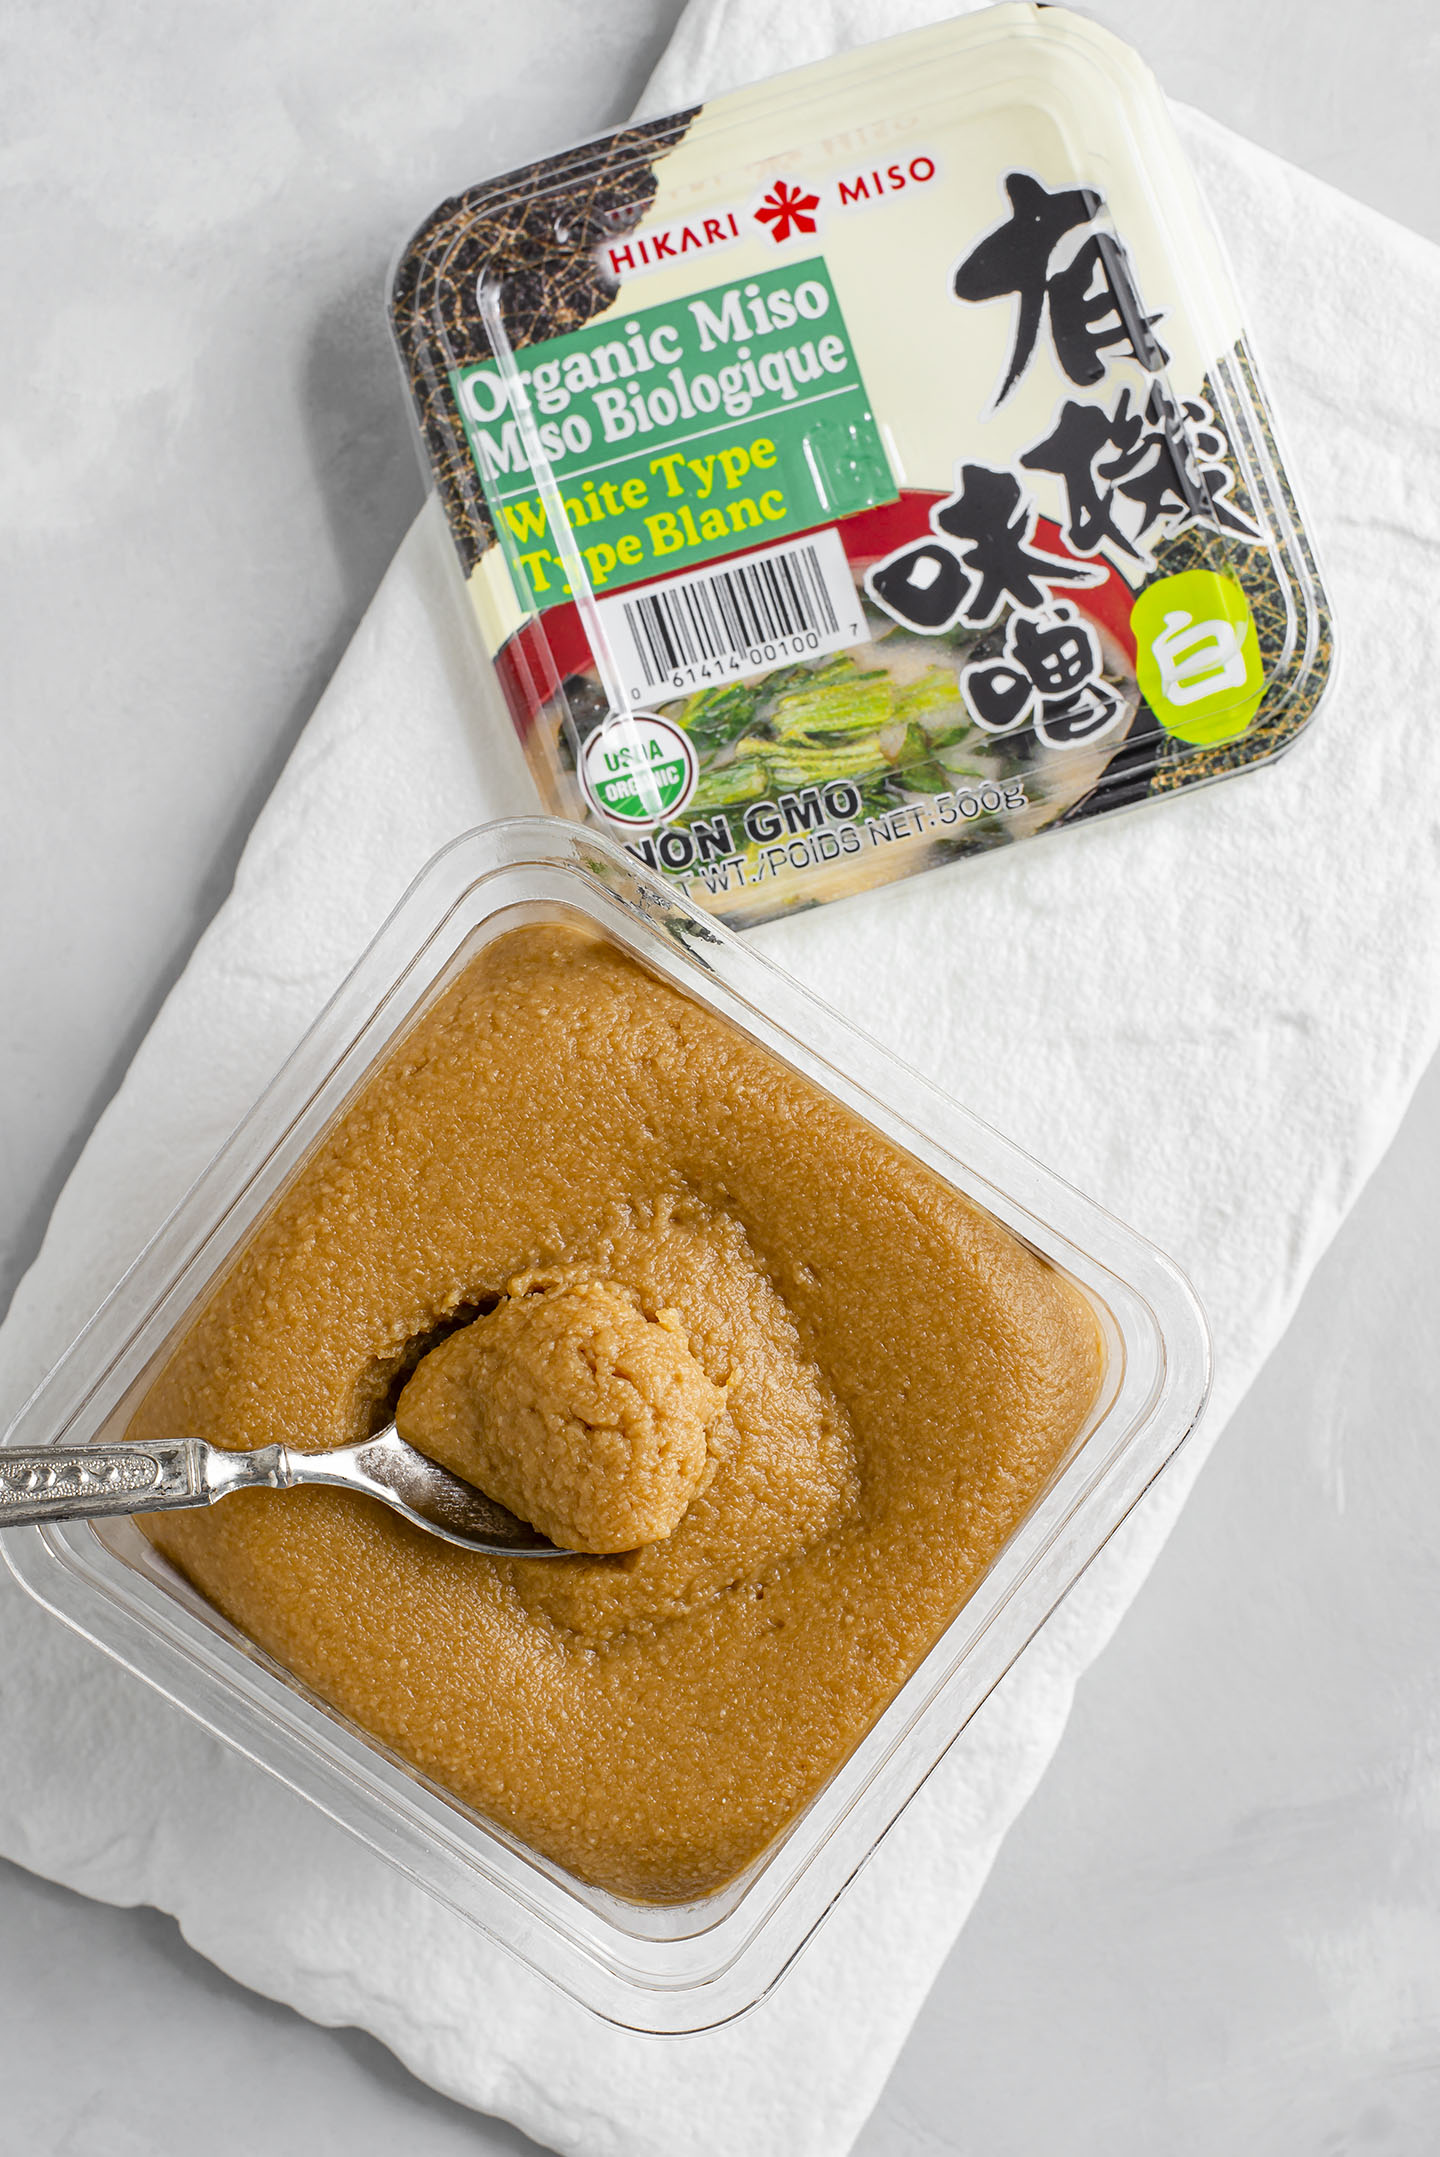 Top down view of miso paste in its packaging. The lid sits next to the open container and a small spoon lifts up the thick fermented soybean paste.